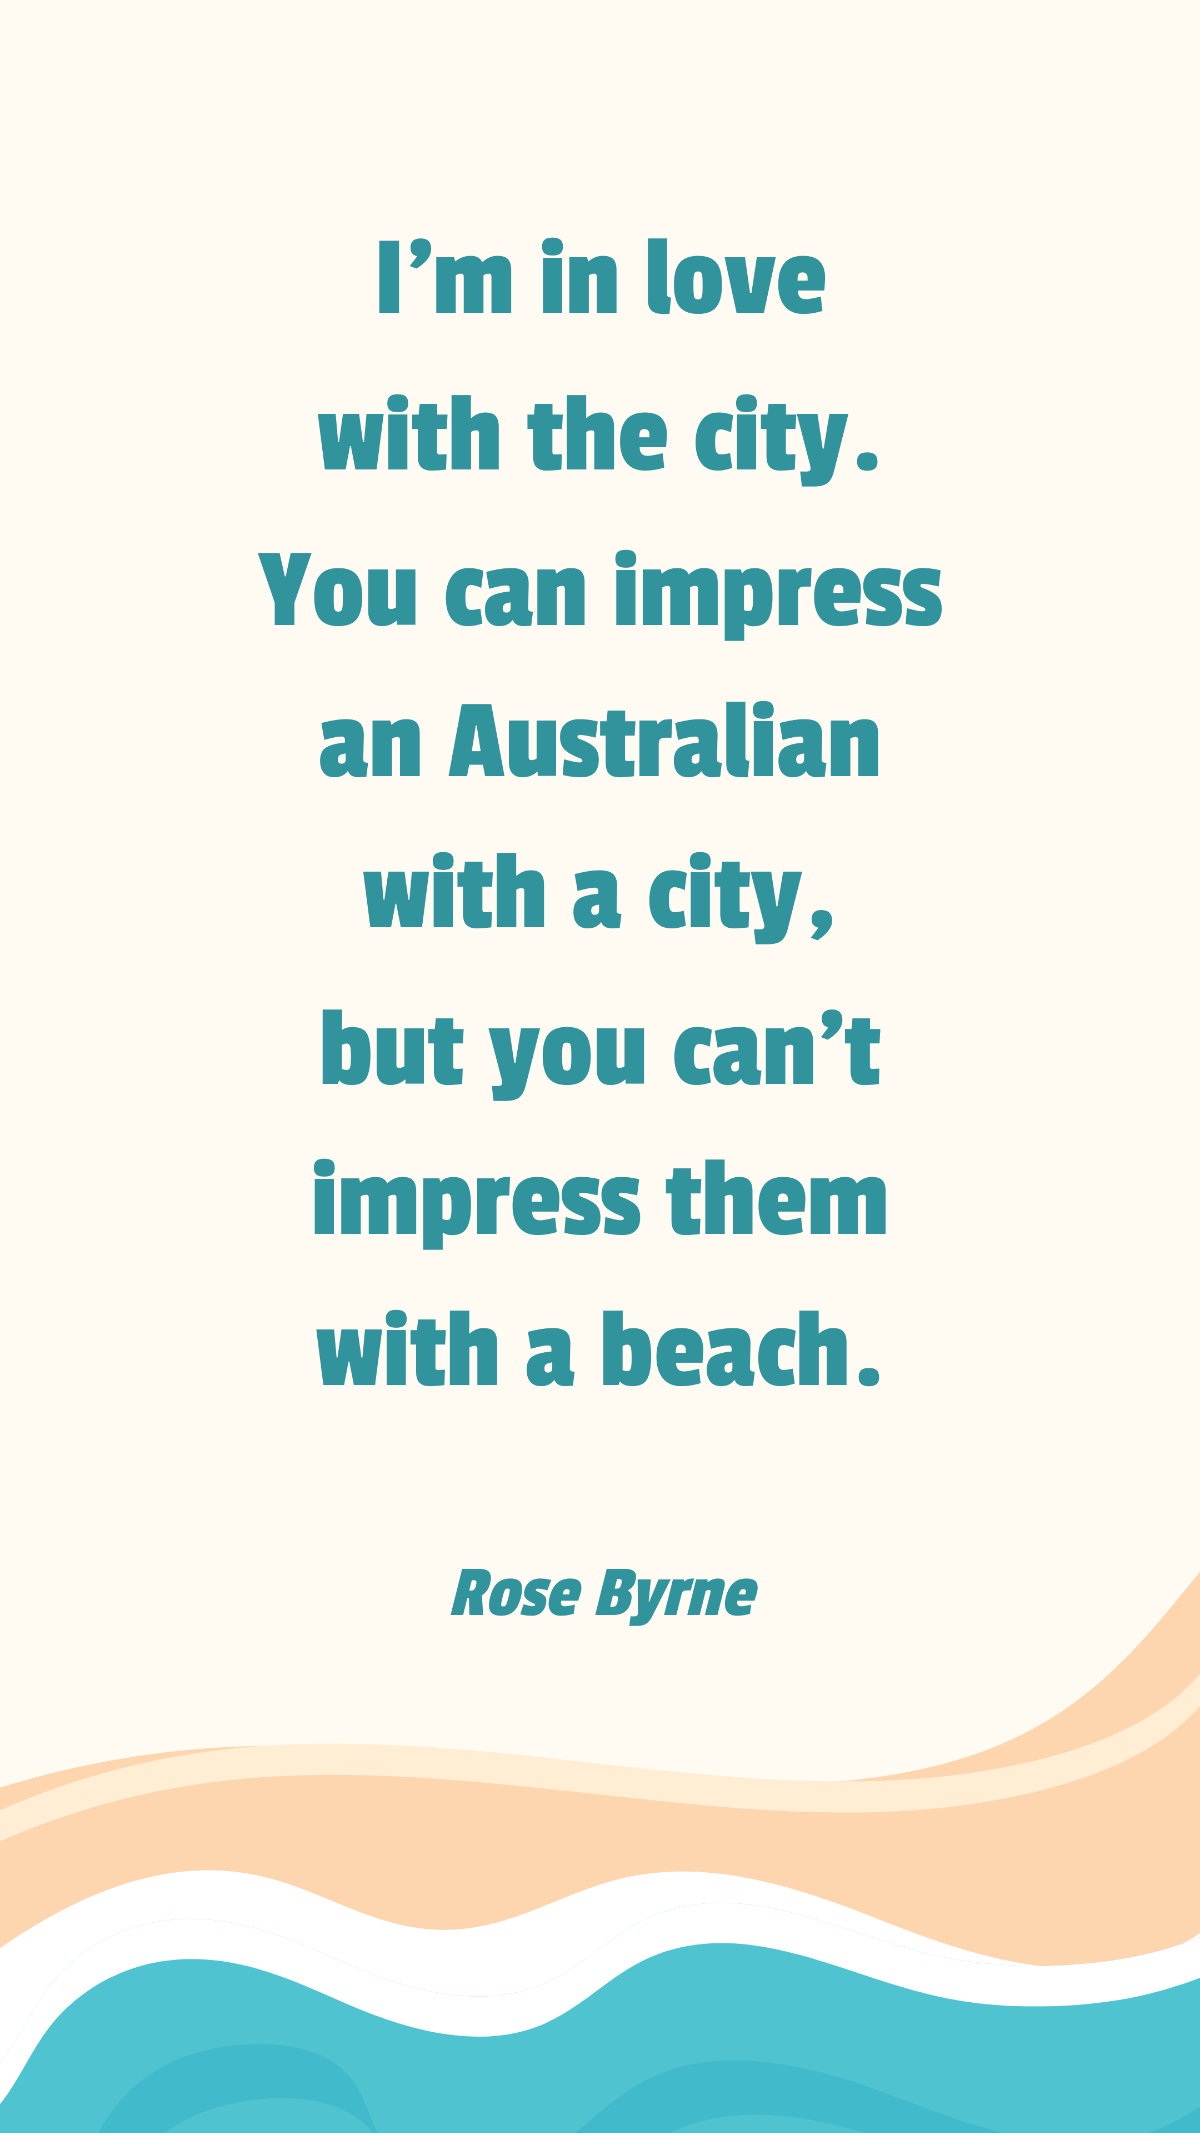 Free Rose Byrne - I'm in love with the city. You can impress an Australian with a city, but you can't impress them with a beach. Template